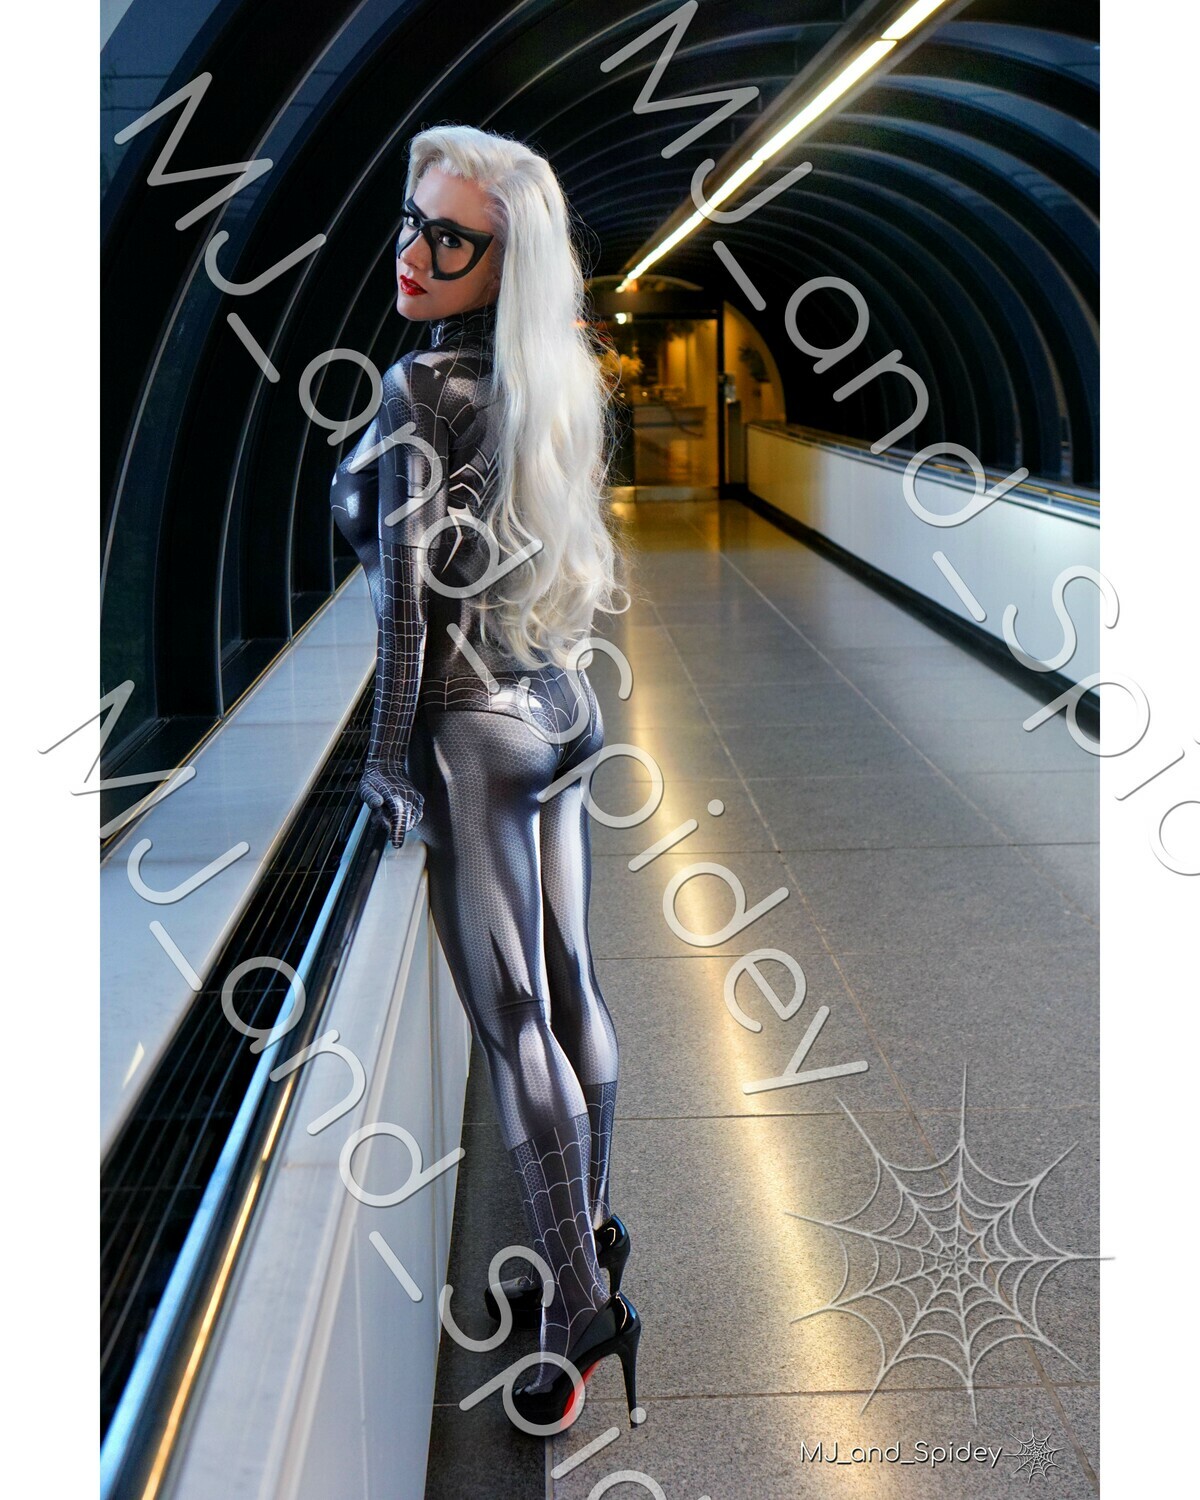 Marvel - Spider-Man - Black Cat - Symbiote No. 3 - Digital Cosplay Image (@MJ_and_Spidey, MJ and Spidey, Comics)